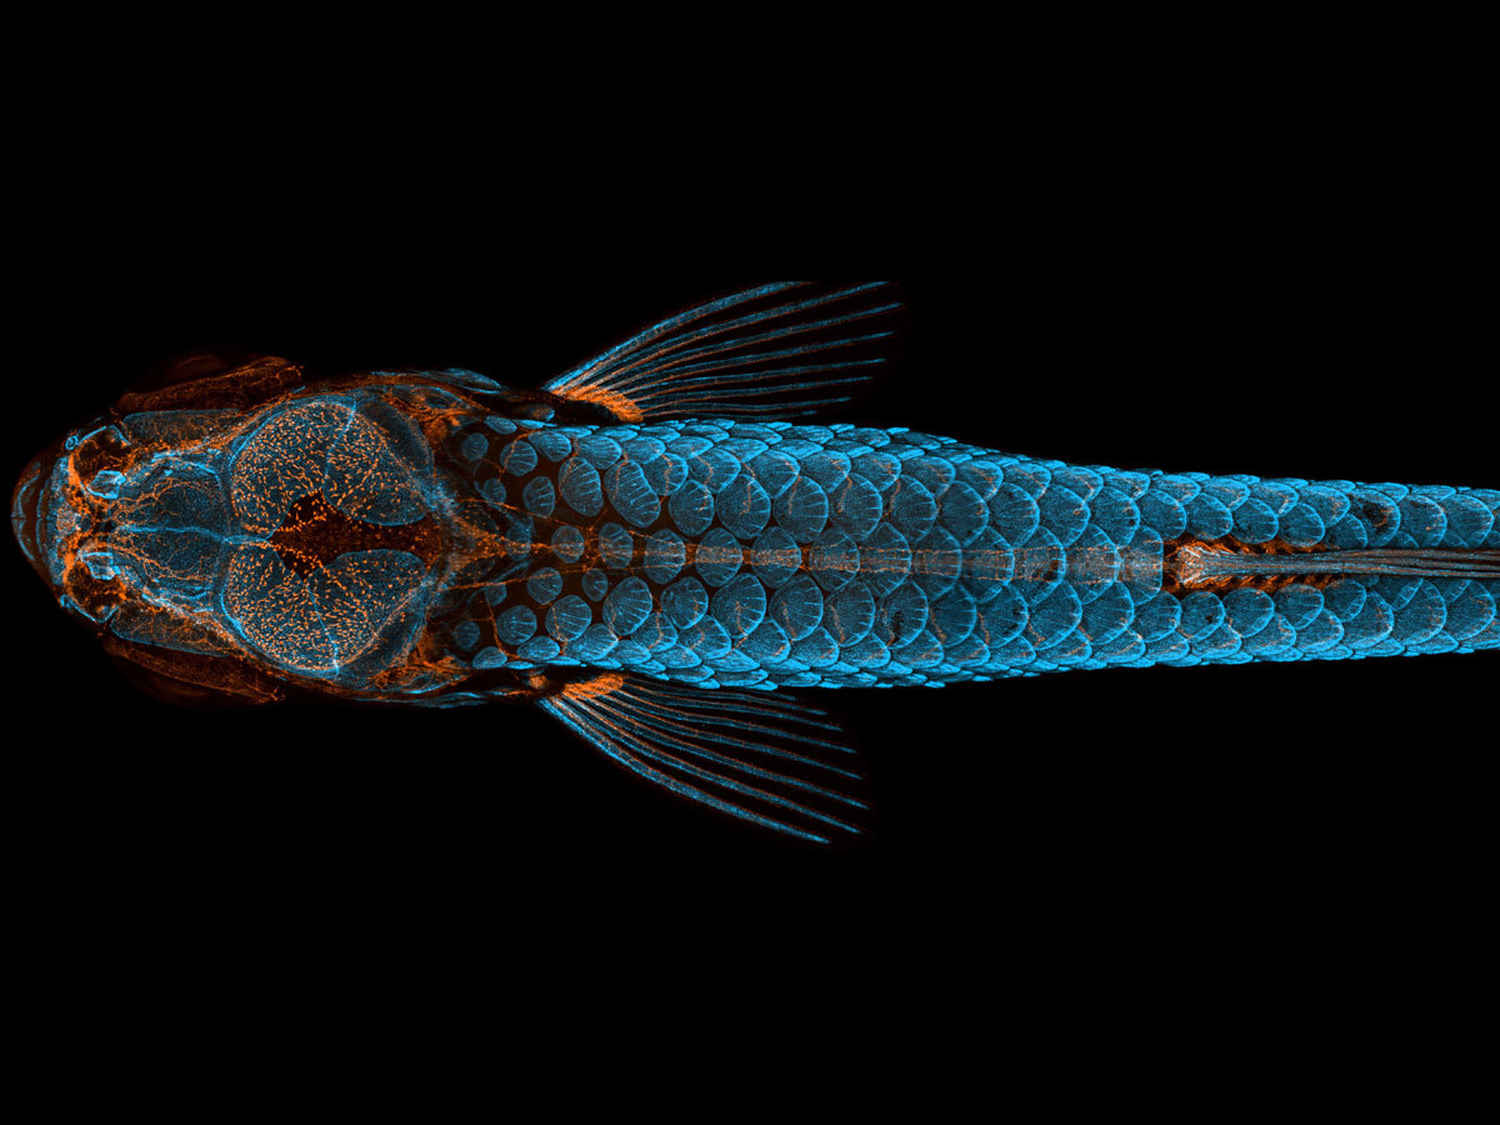 Zebrafish are viewed by embryologists under the microscope with fluorescent imaging